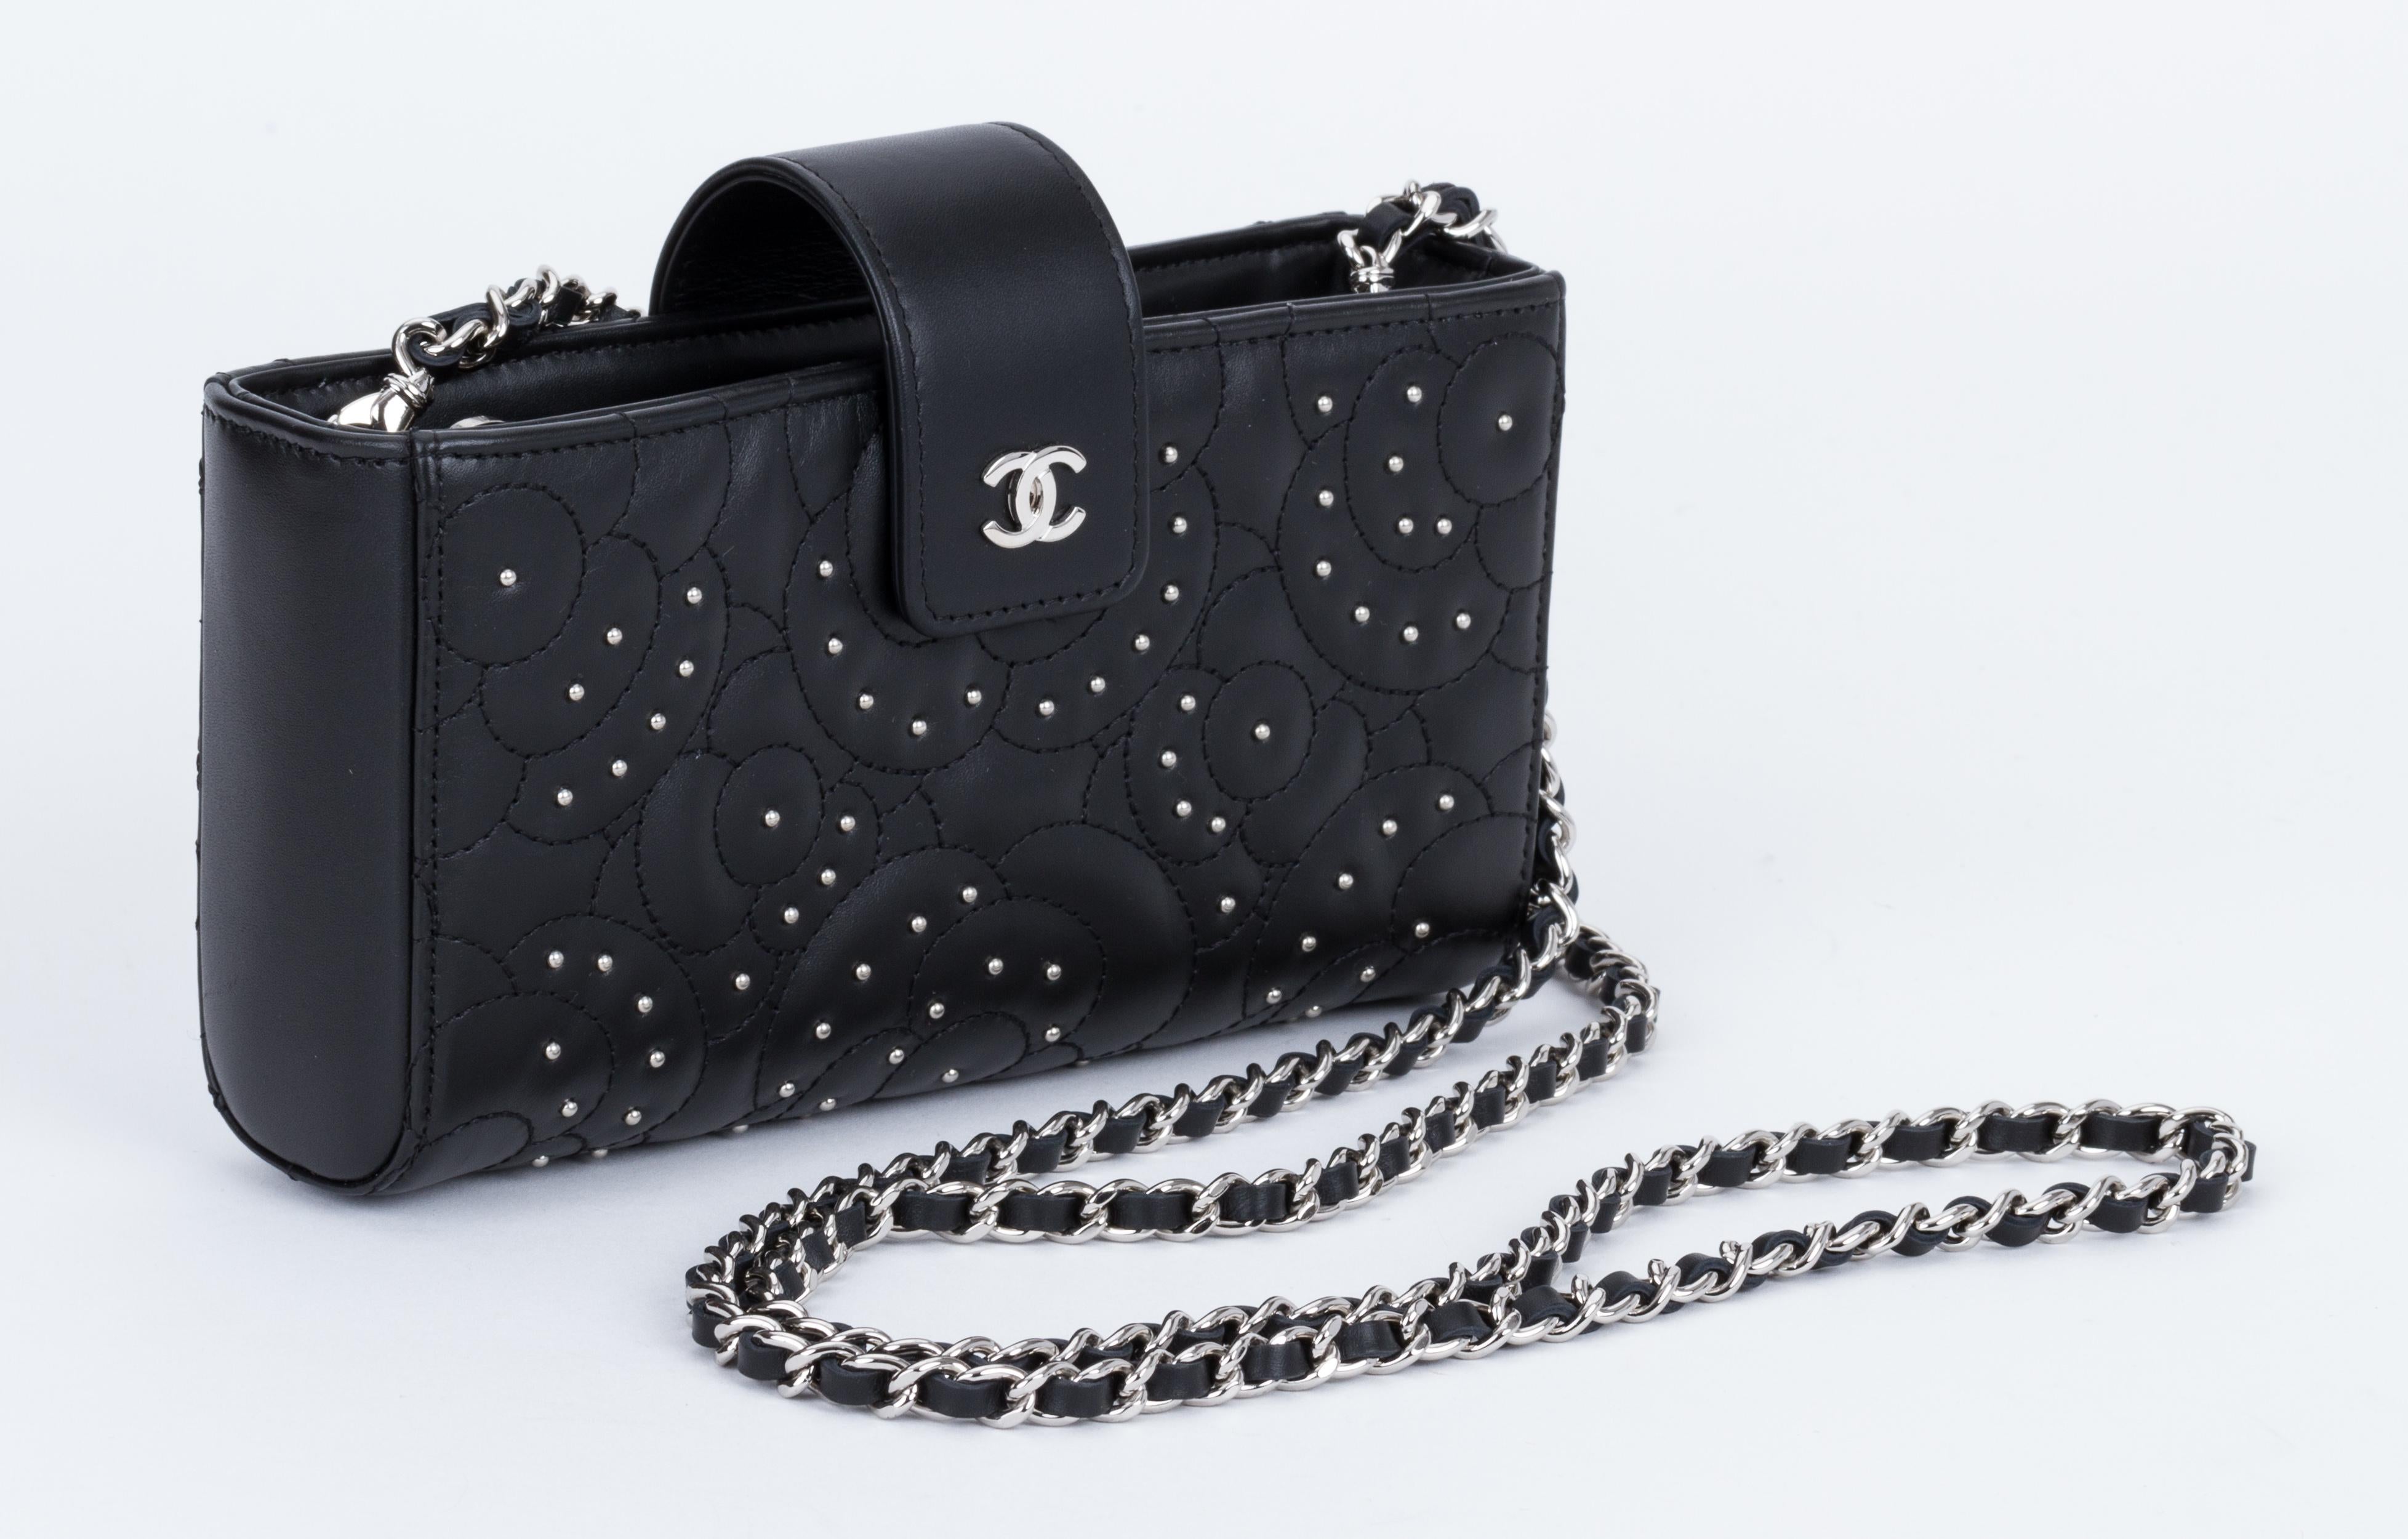 New in box, Chanel black lambskin camellia studs cross body bag. One zipped center compartment and two side open pockets. Detachable strap, shoulder drop 24